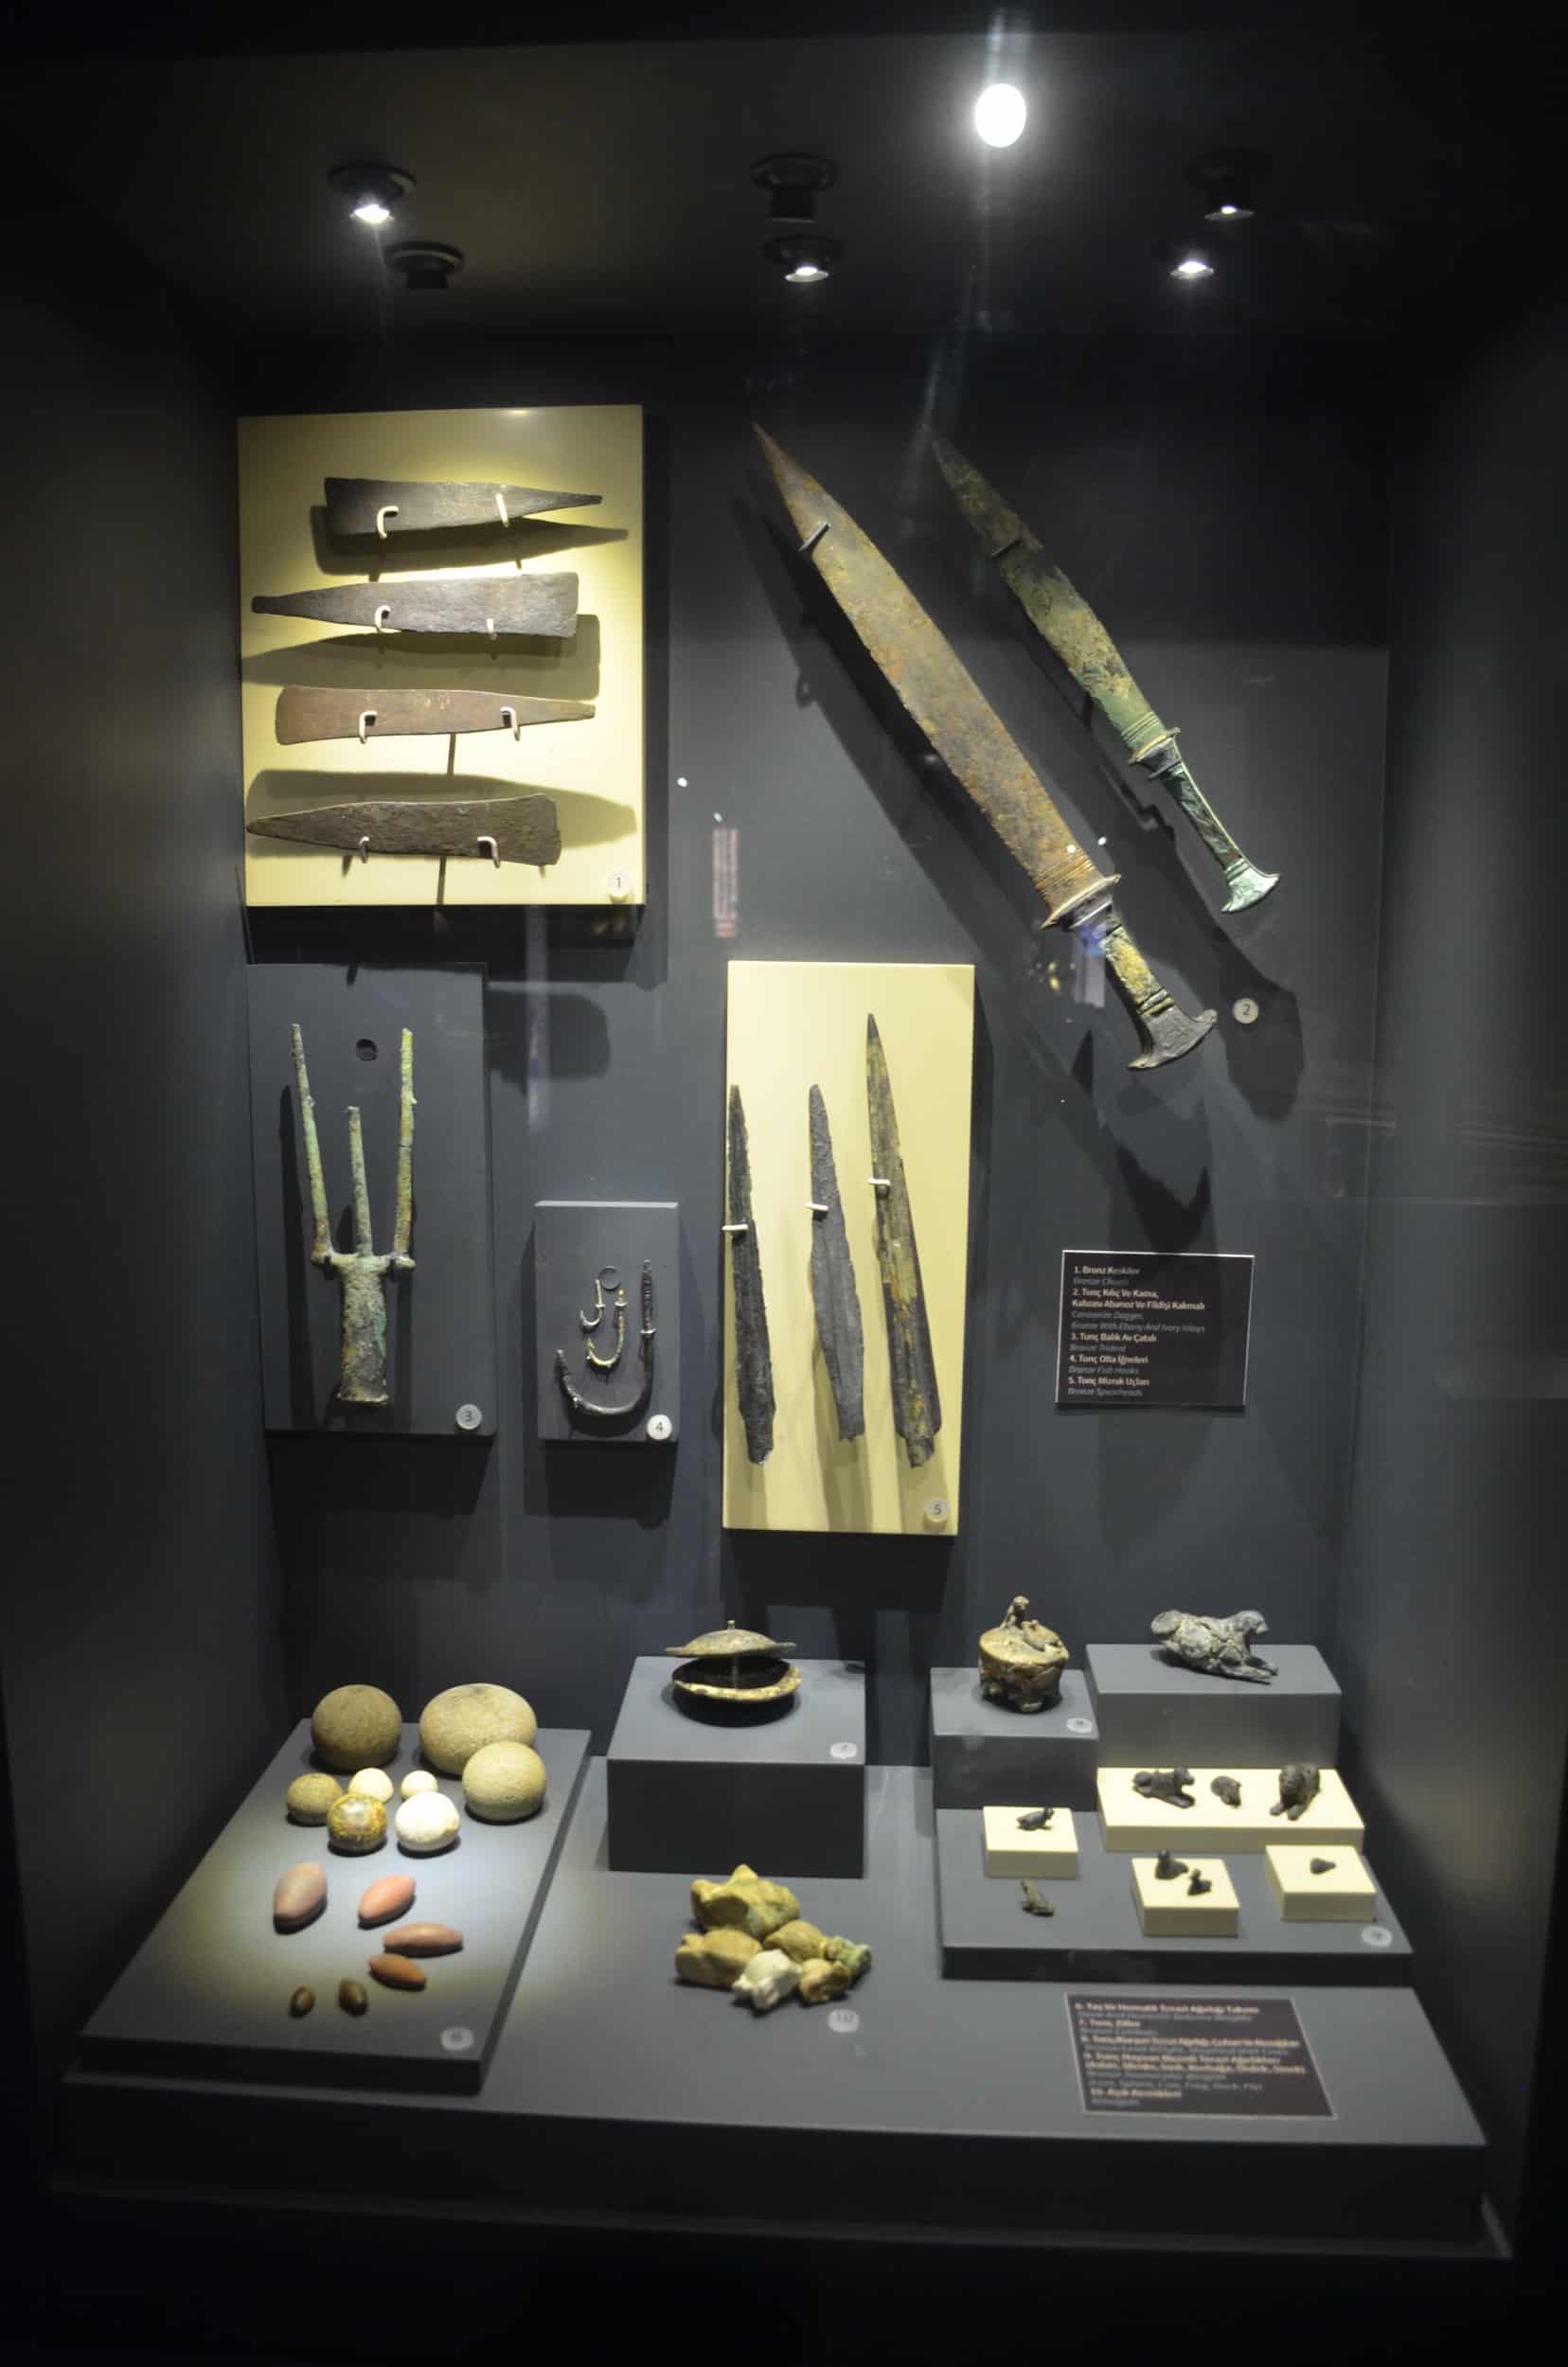 Findings from the Gelidonya shipwreck in the Late Bronze Age Shipwrecks Exhibition